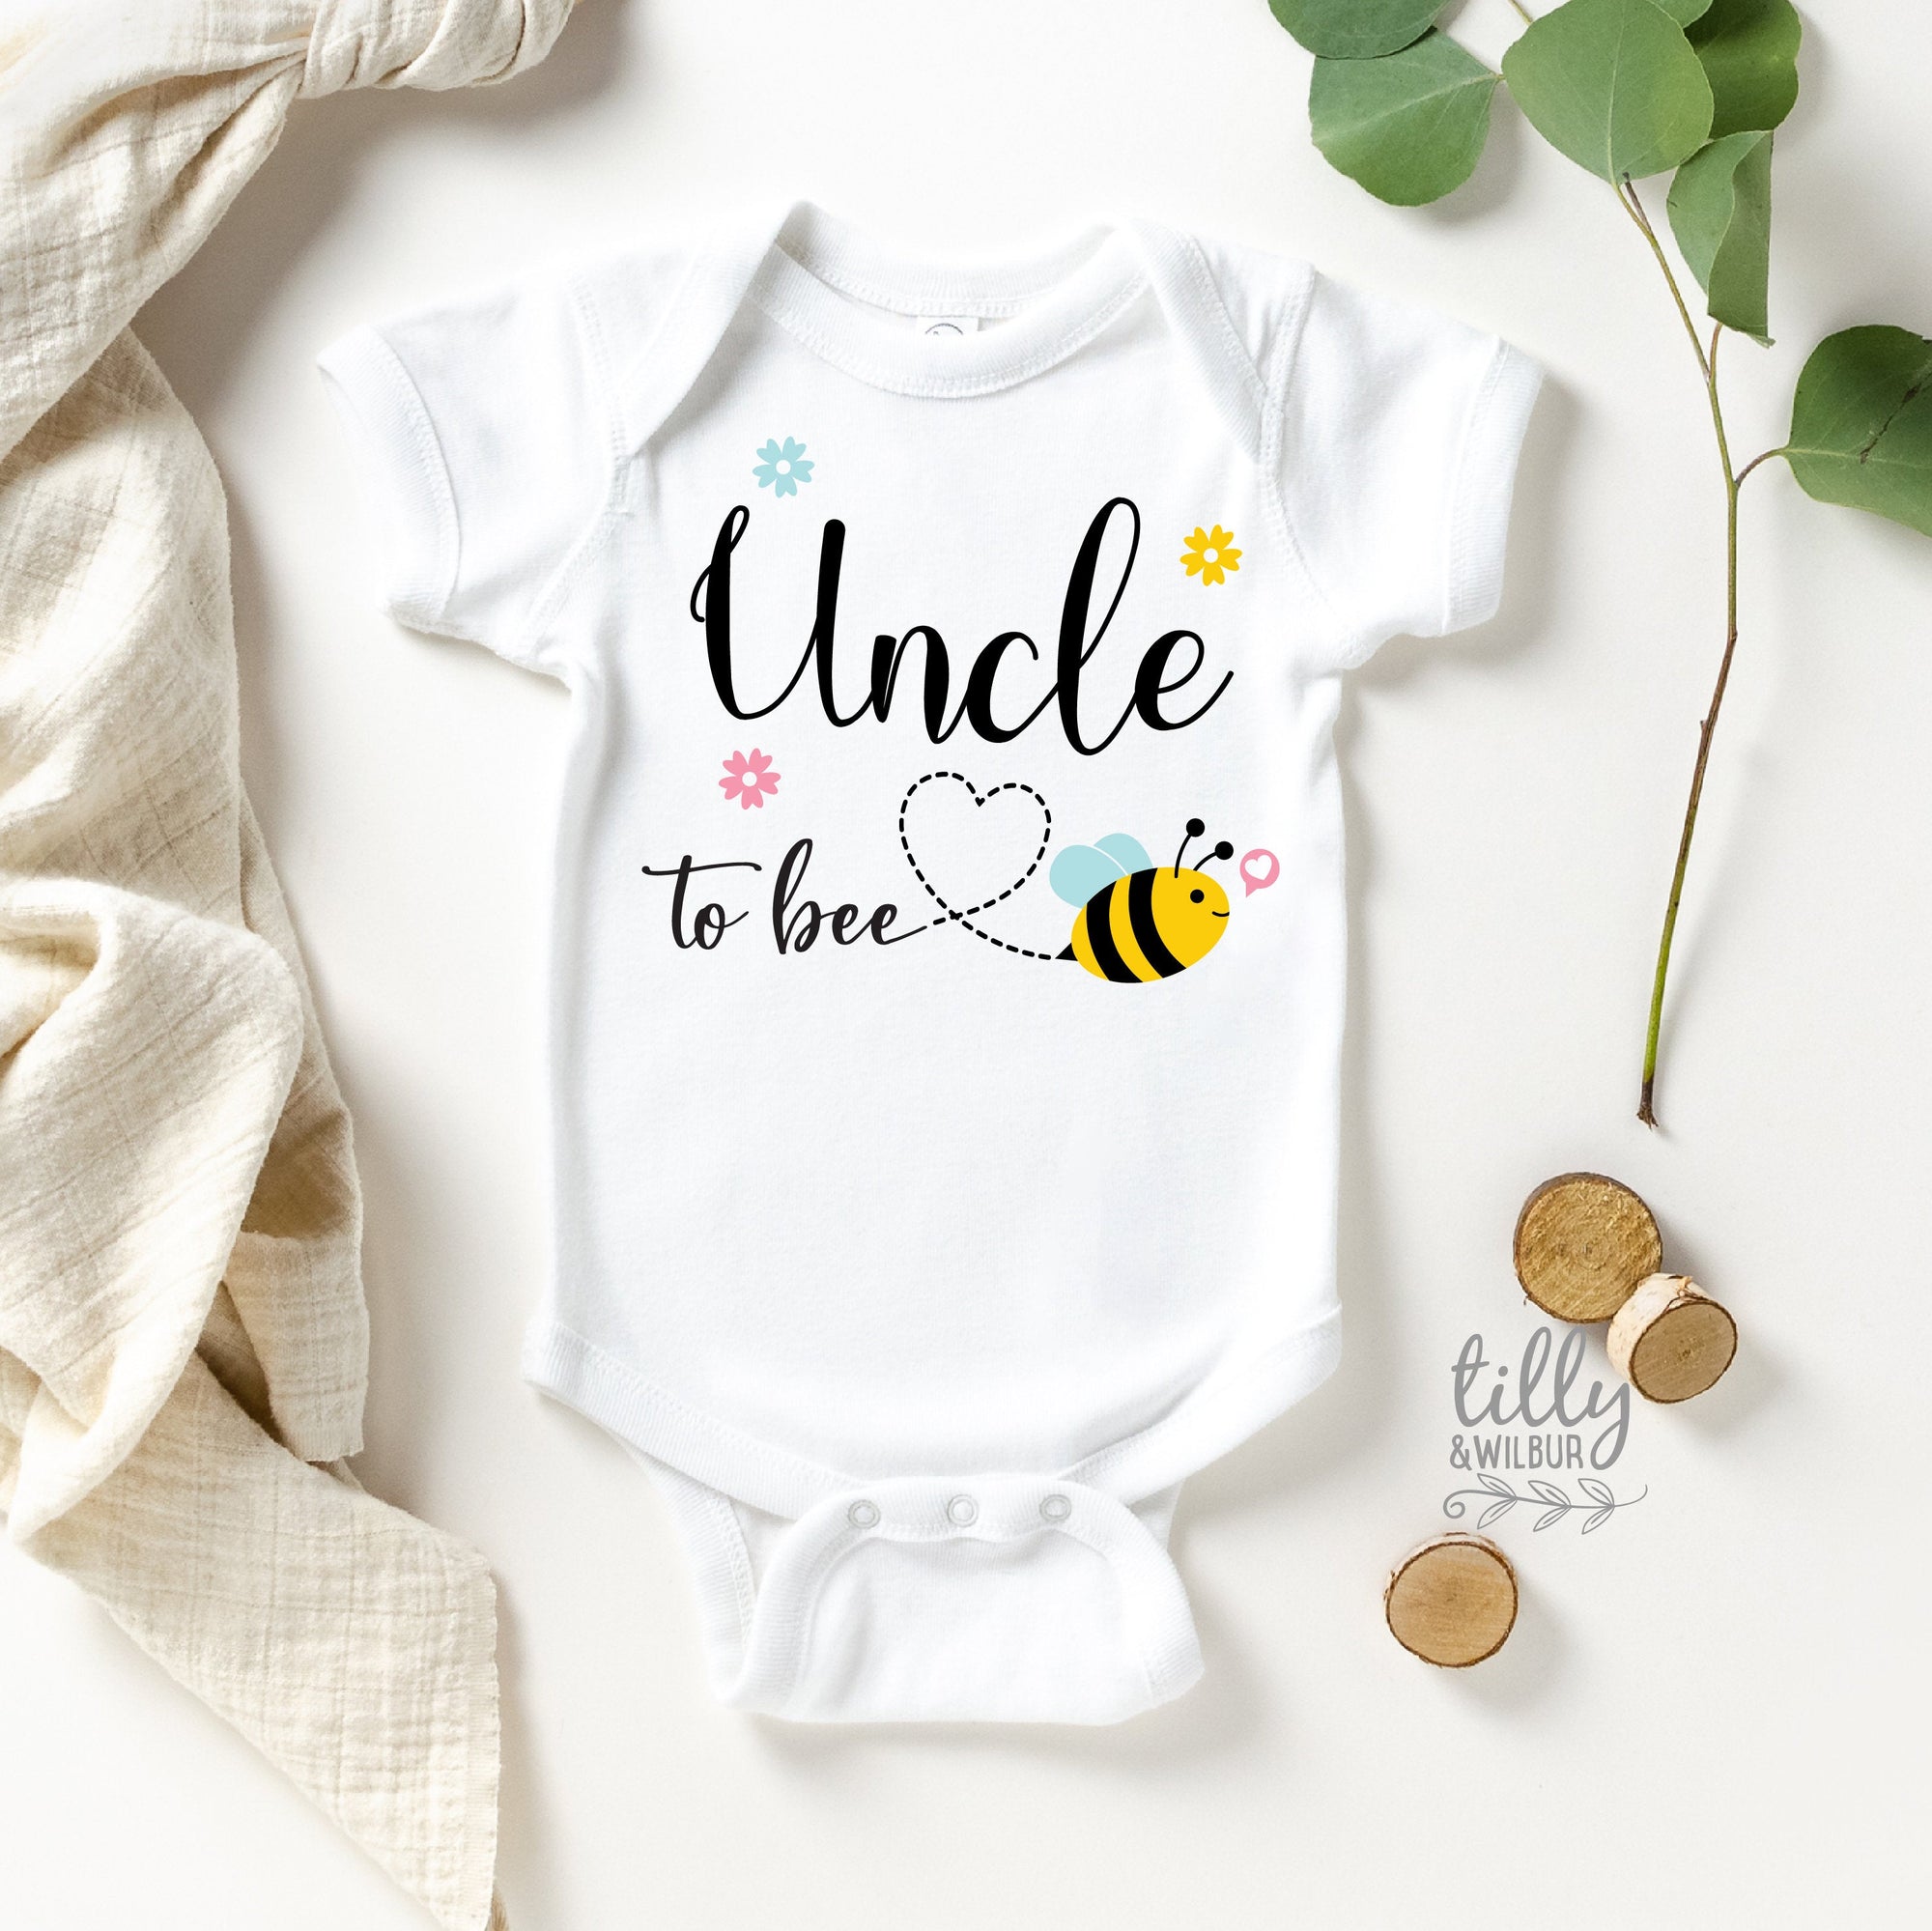 Uncle To Bee Bodysuit, Hello Uncle Onesie, Pregnancy Announcement To Brother, Uncle To Be, Announcement Onesie, Reveal To Uncle, New Uncle